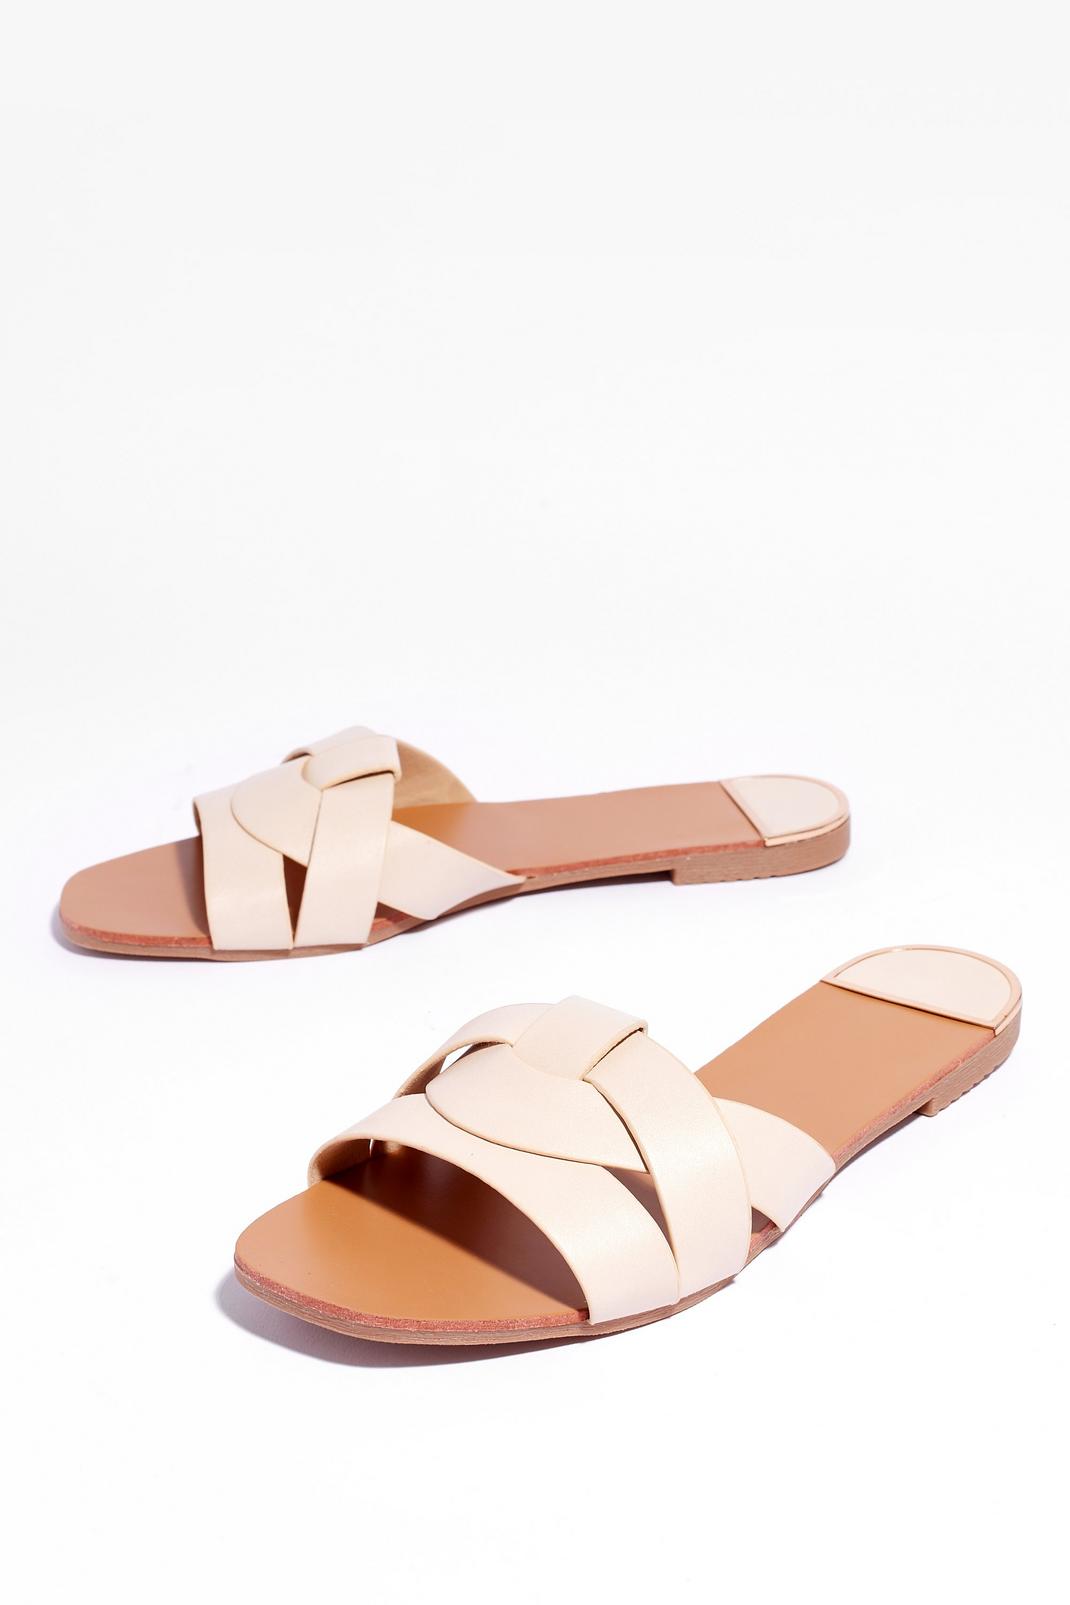 The Woven Ones Faux Leather Flat Sandals | Nasty Gal